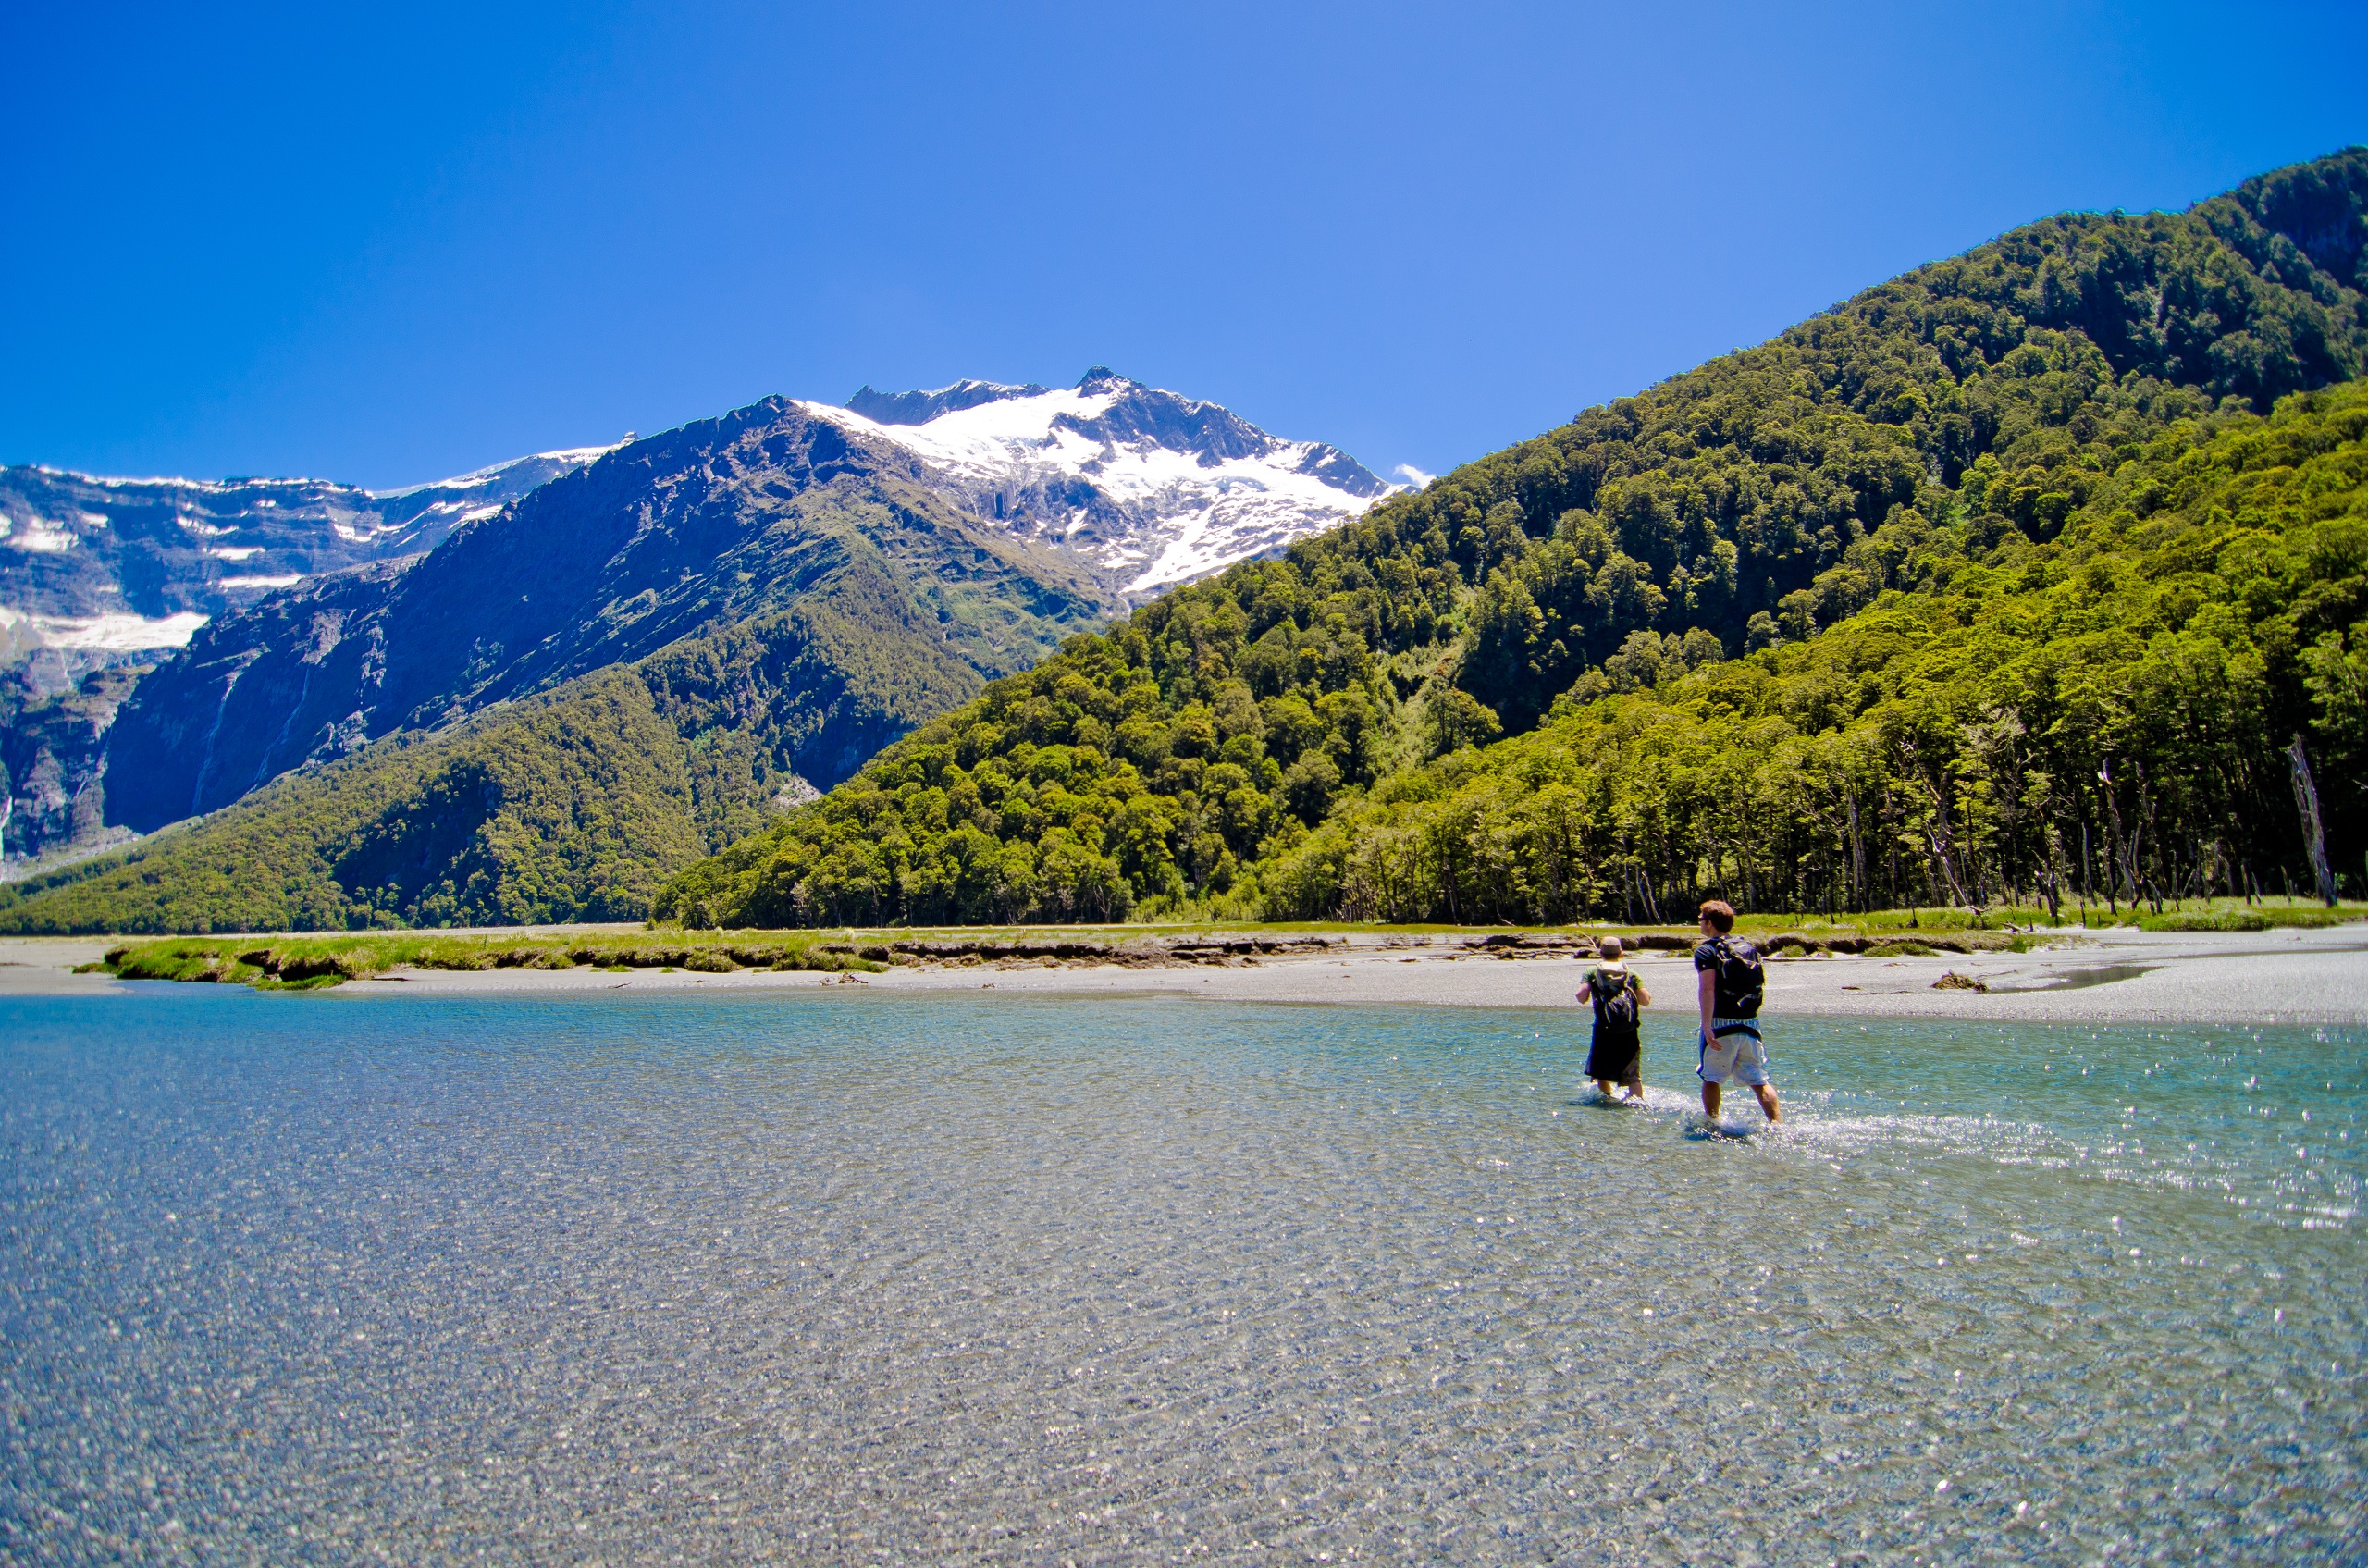 Hikers crossing a river with mountains in the background